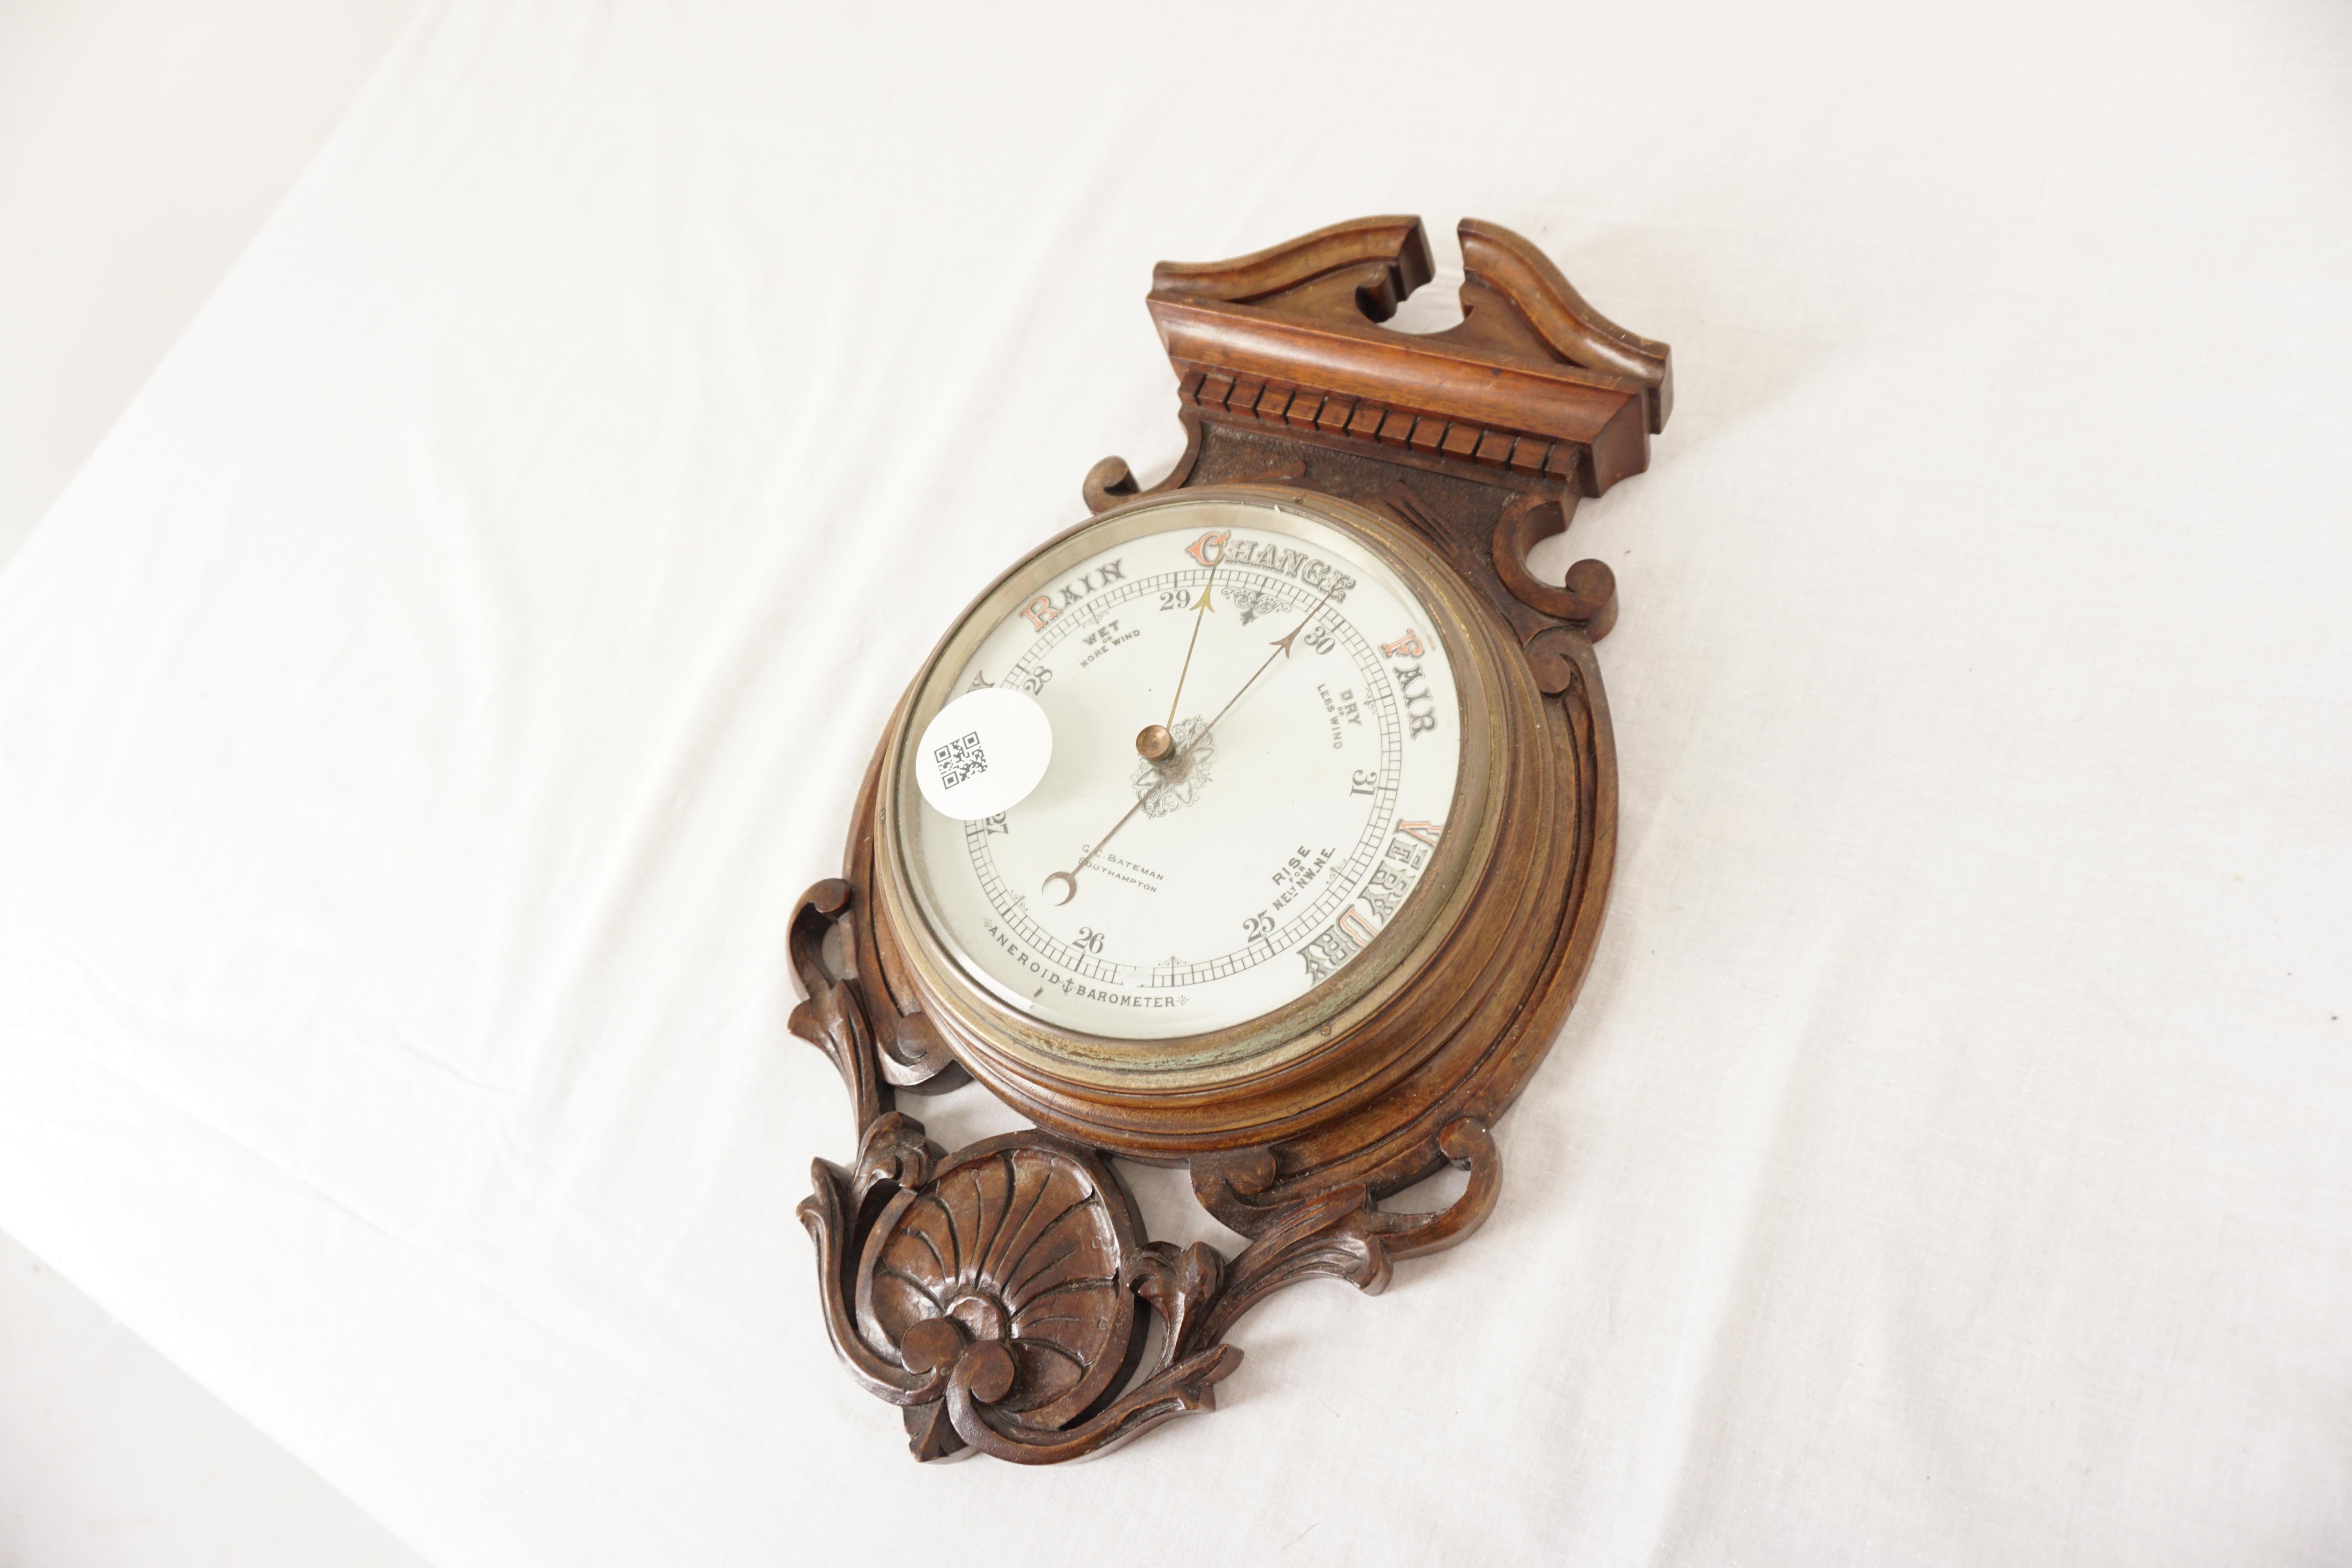 Ant. Victorian Polished Walnut Carved Wall Aneroid Barometer G.C. Bateman, South Hampton, Scotland 1880, H1037

Scotland 1880
Solid Walnut
Original Finish
Carved Swan Neck top
Circular porcelain dial
Hand painted numbers
With brass bezel